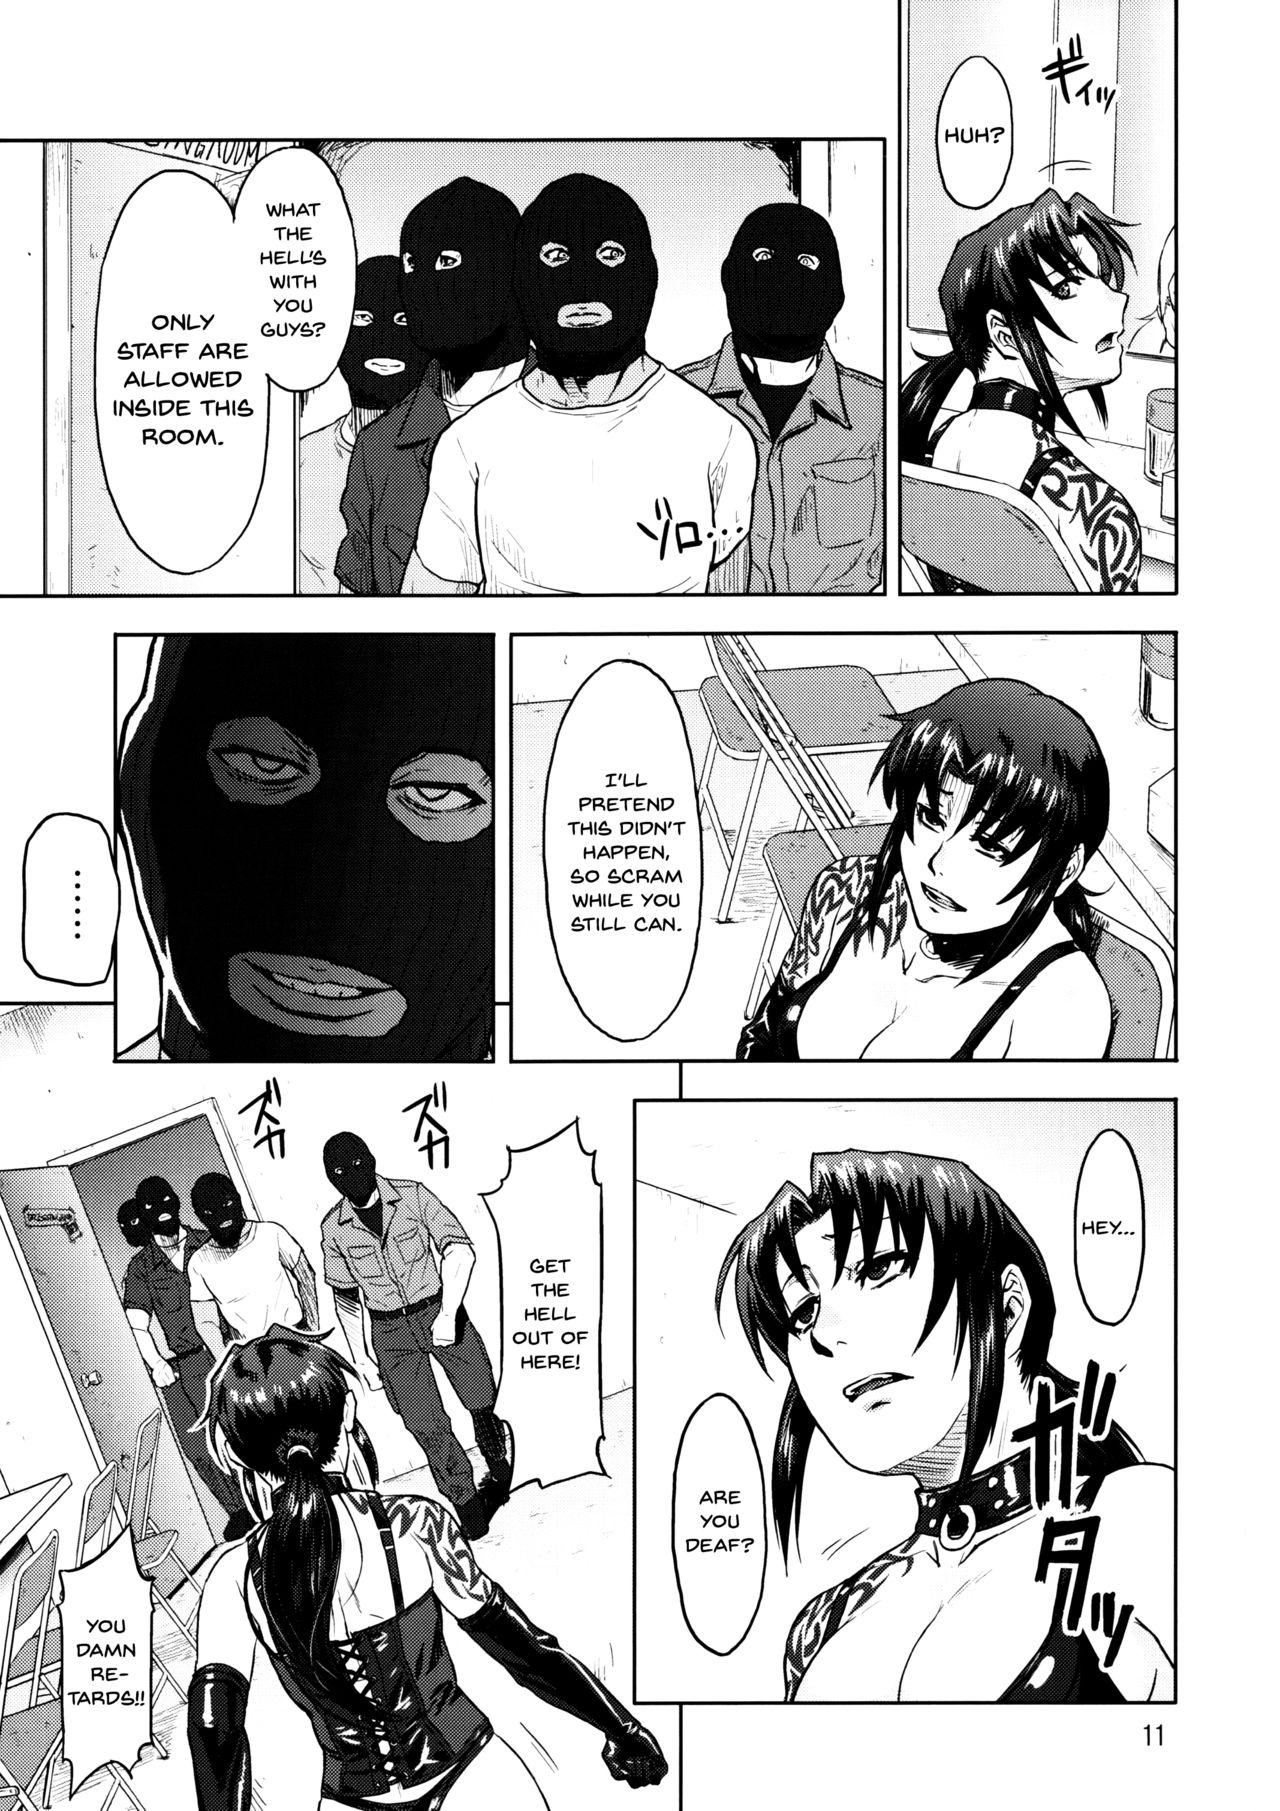 Phat Dressing Room - Black lagoon Consolo - Page 11